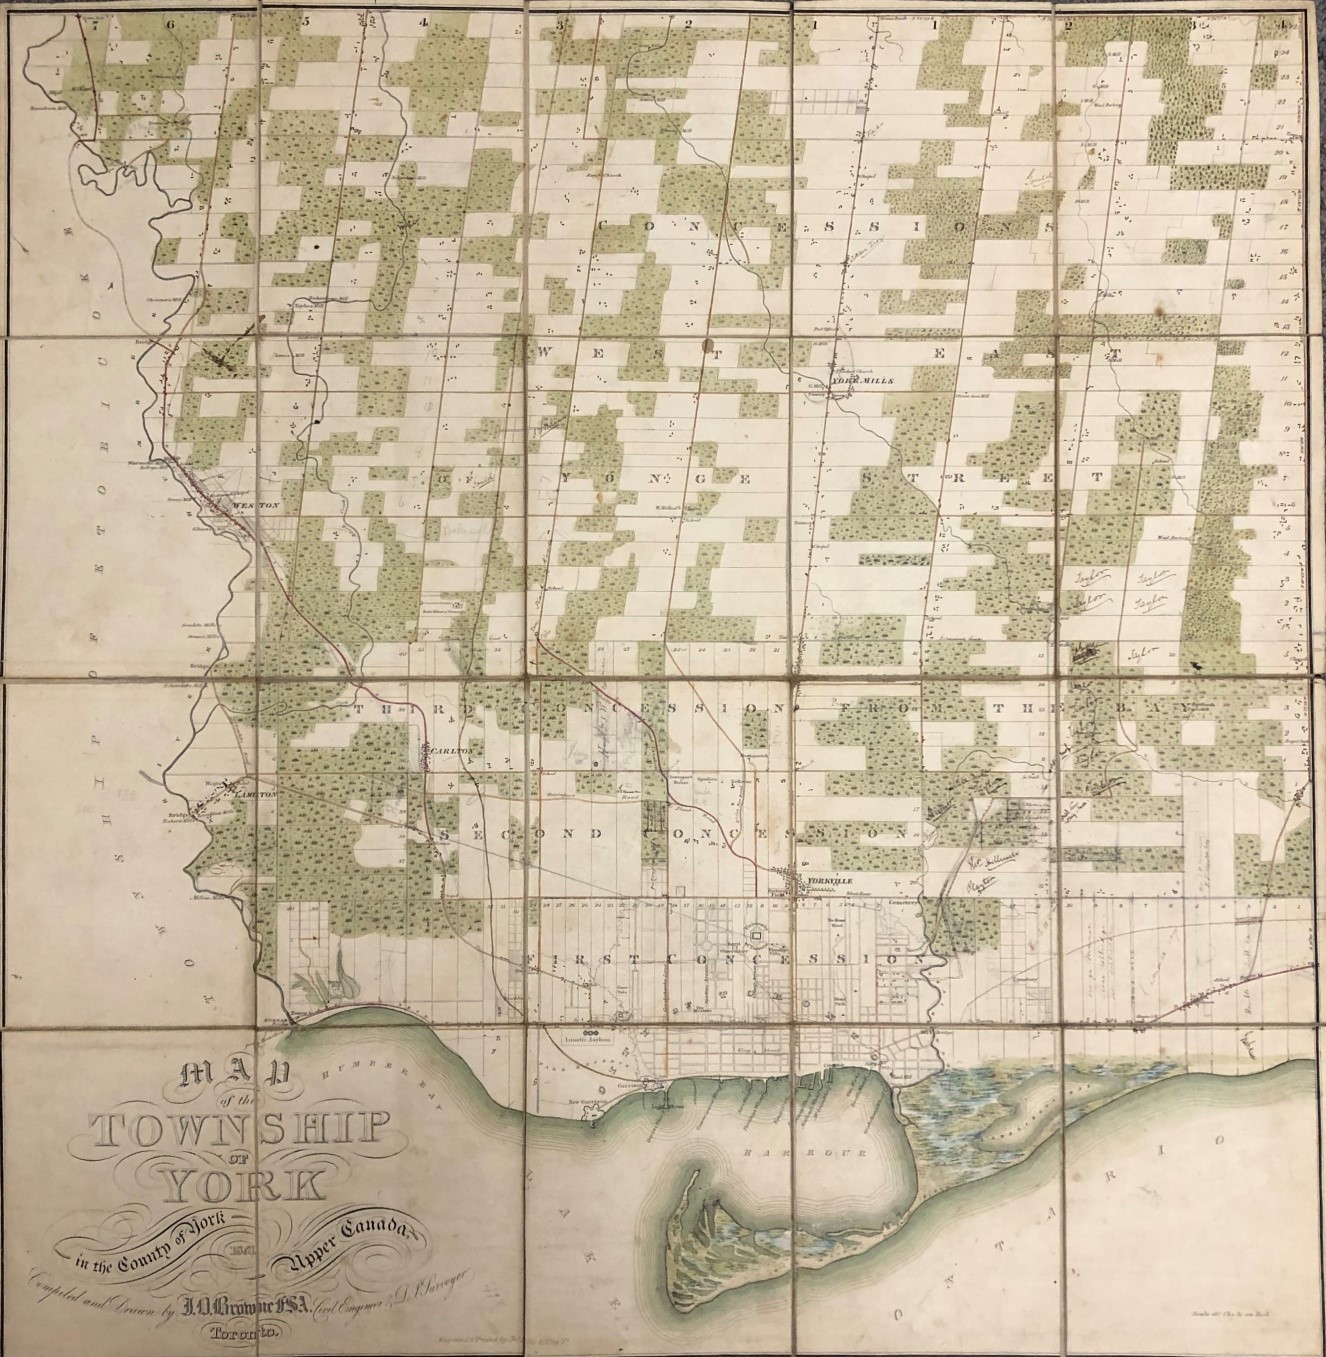 BROWNE, J[ohn] O[wensworth] [1808-1881]. Map of the Township Of York in the County of York Upper Canada. 